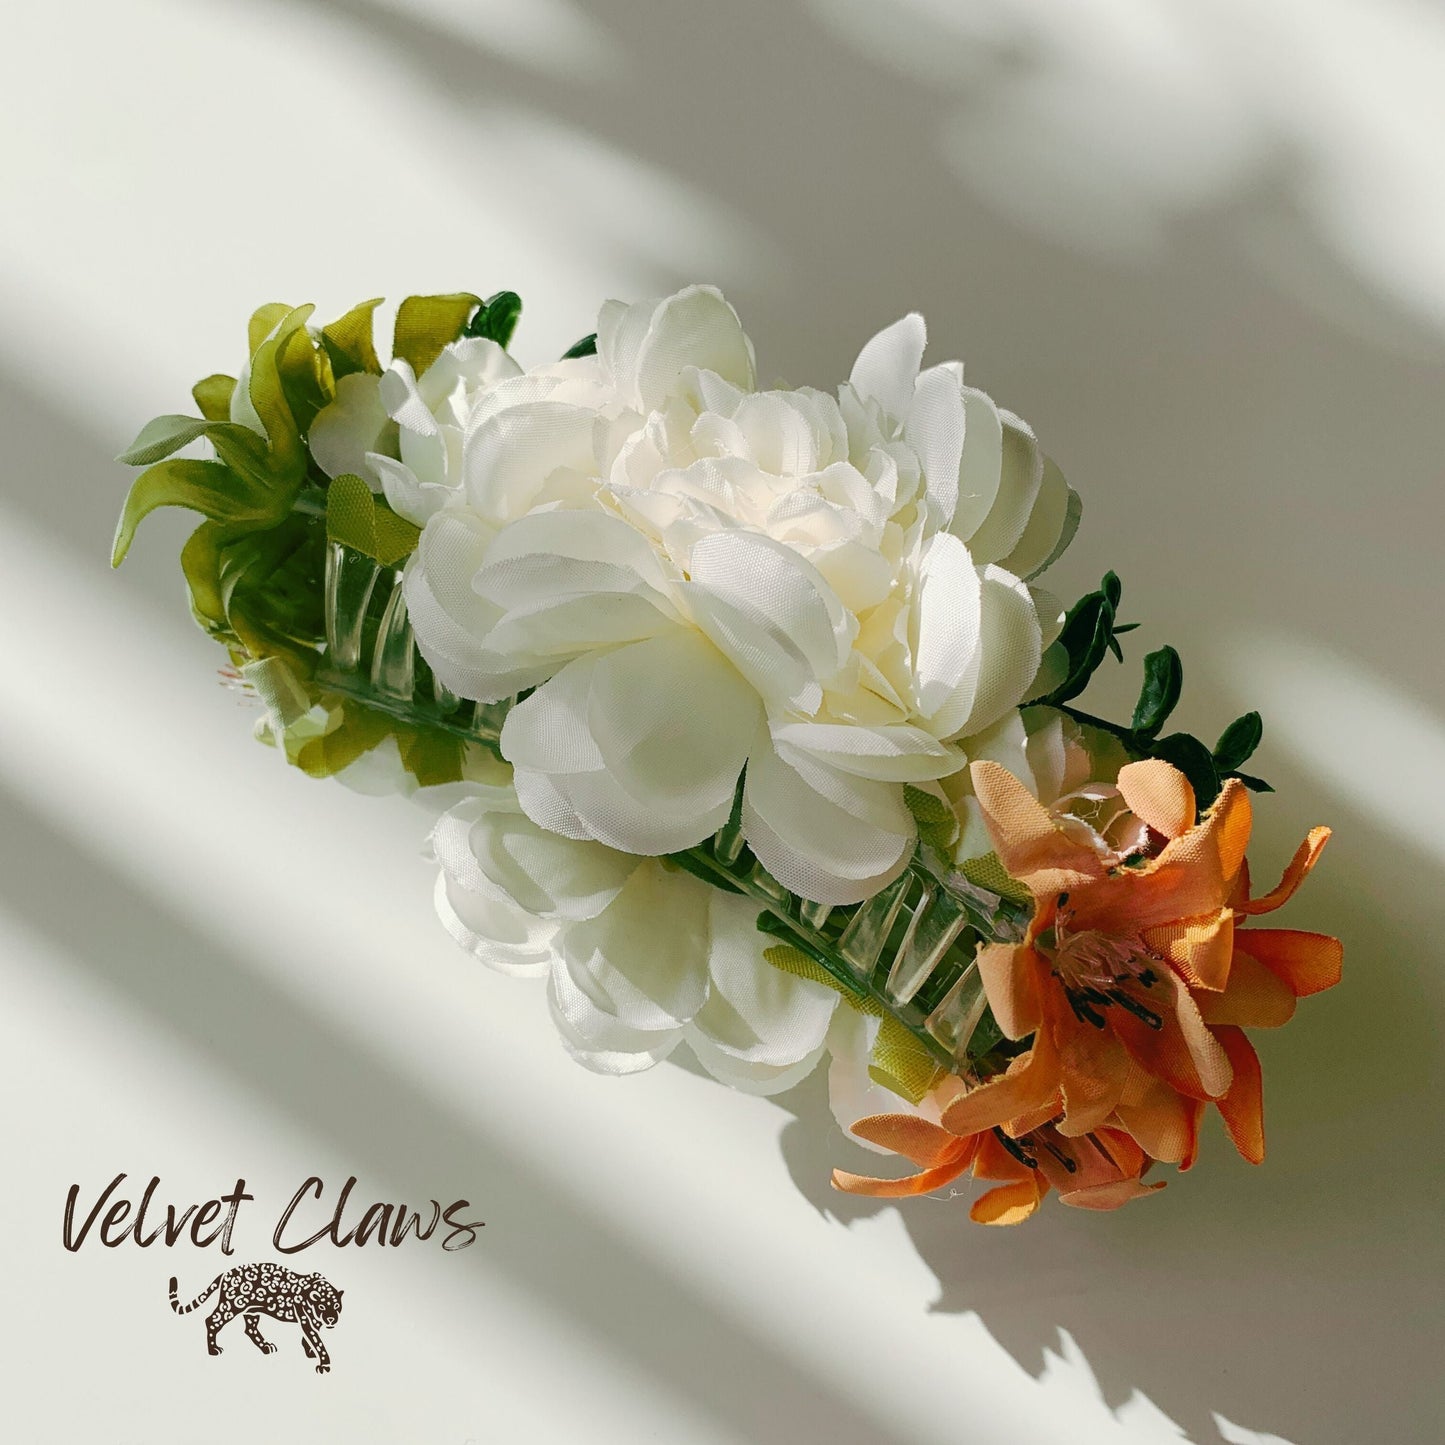 Velvet Claws Floral Hair Clip | Coral and White Blooms | Claw Clip in Velvet Travel Bag